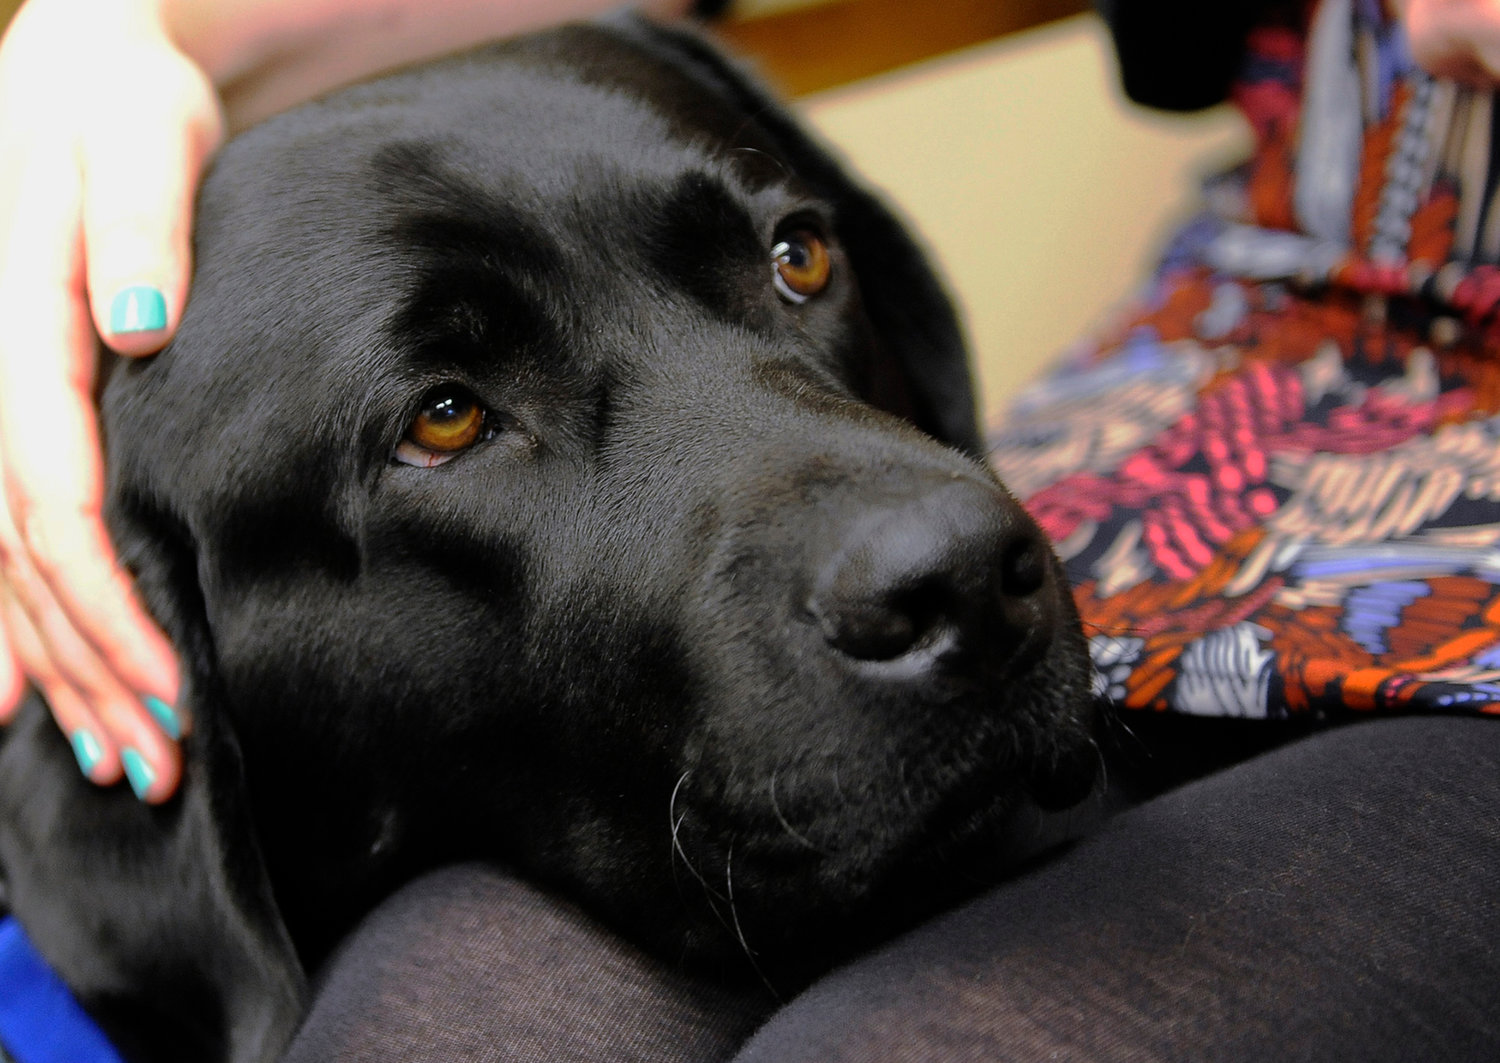 Marshal, the new courthouse facility dog, rests his head on the lap of an unidentified person at the Thurston County Courthouse in Olympia, Wash., Thursday, Dec. 24, 2015. The 2-year-old black lab has been specially trained to comfort crime victims at the county courthouse. (Steve Bloom/The Olympian via AP)